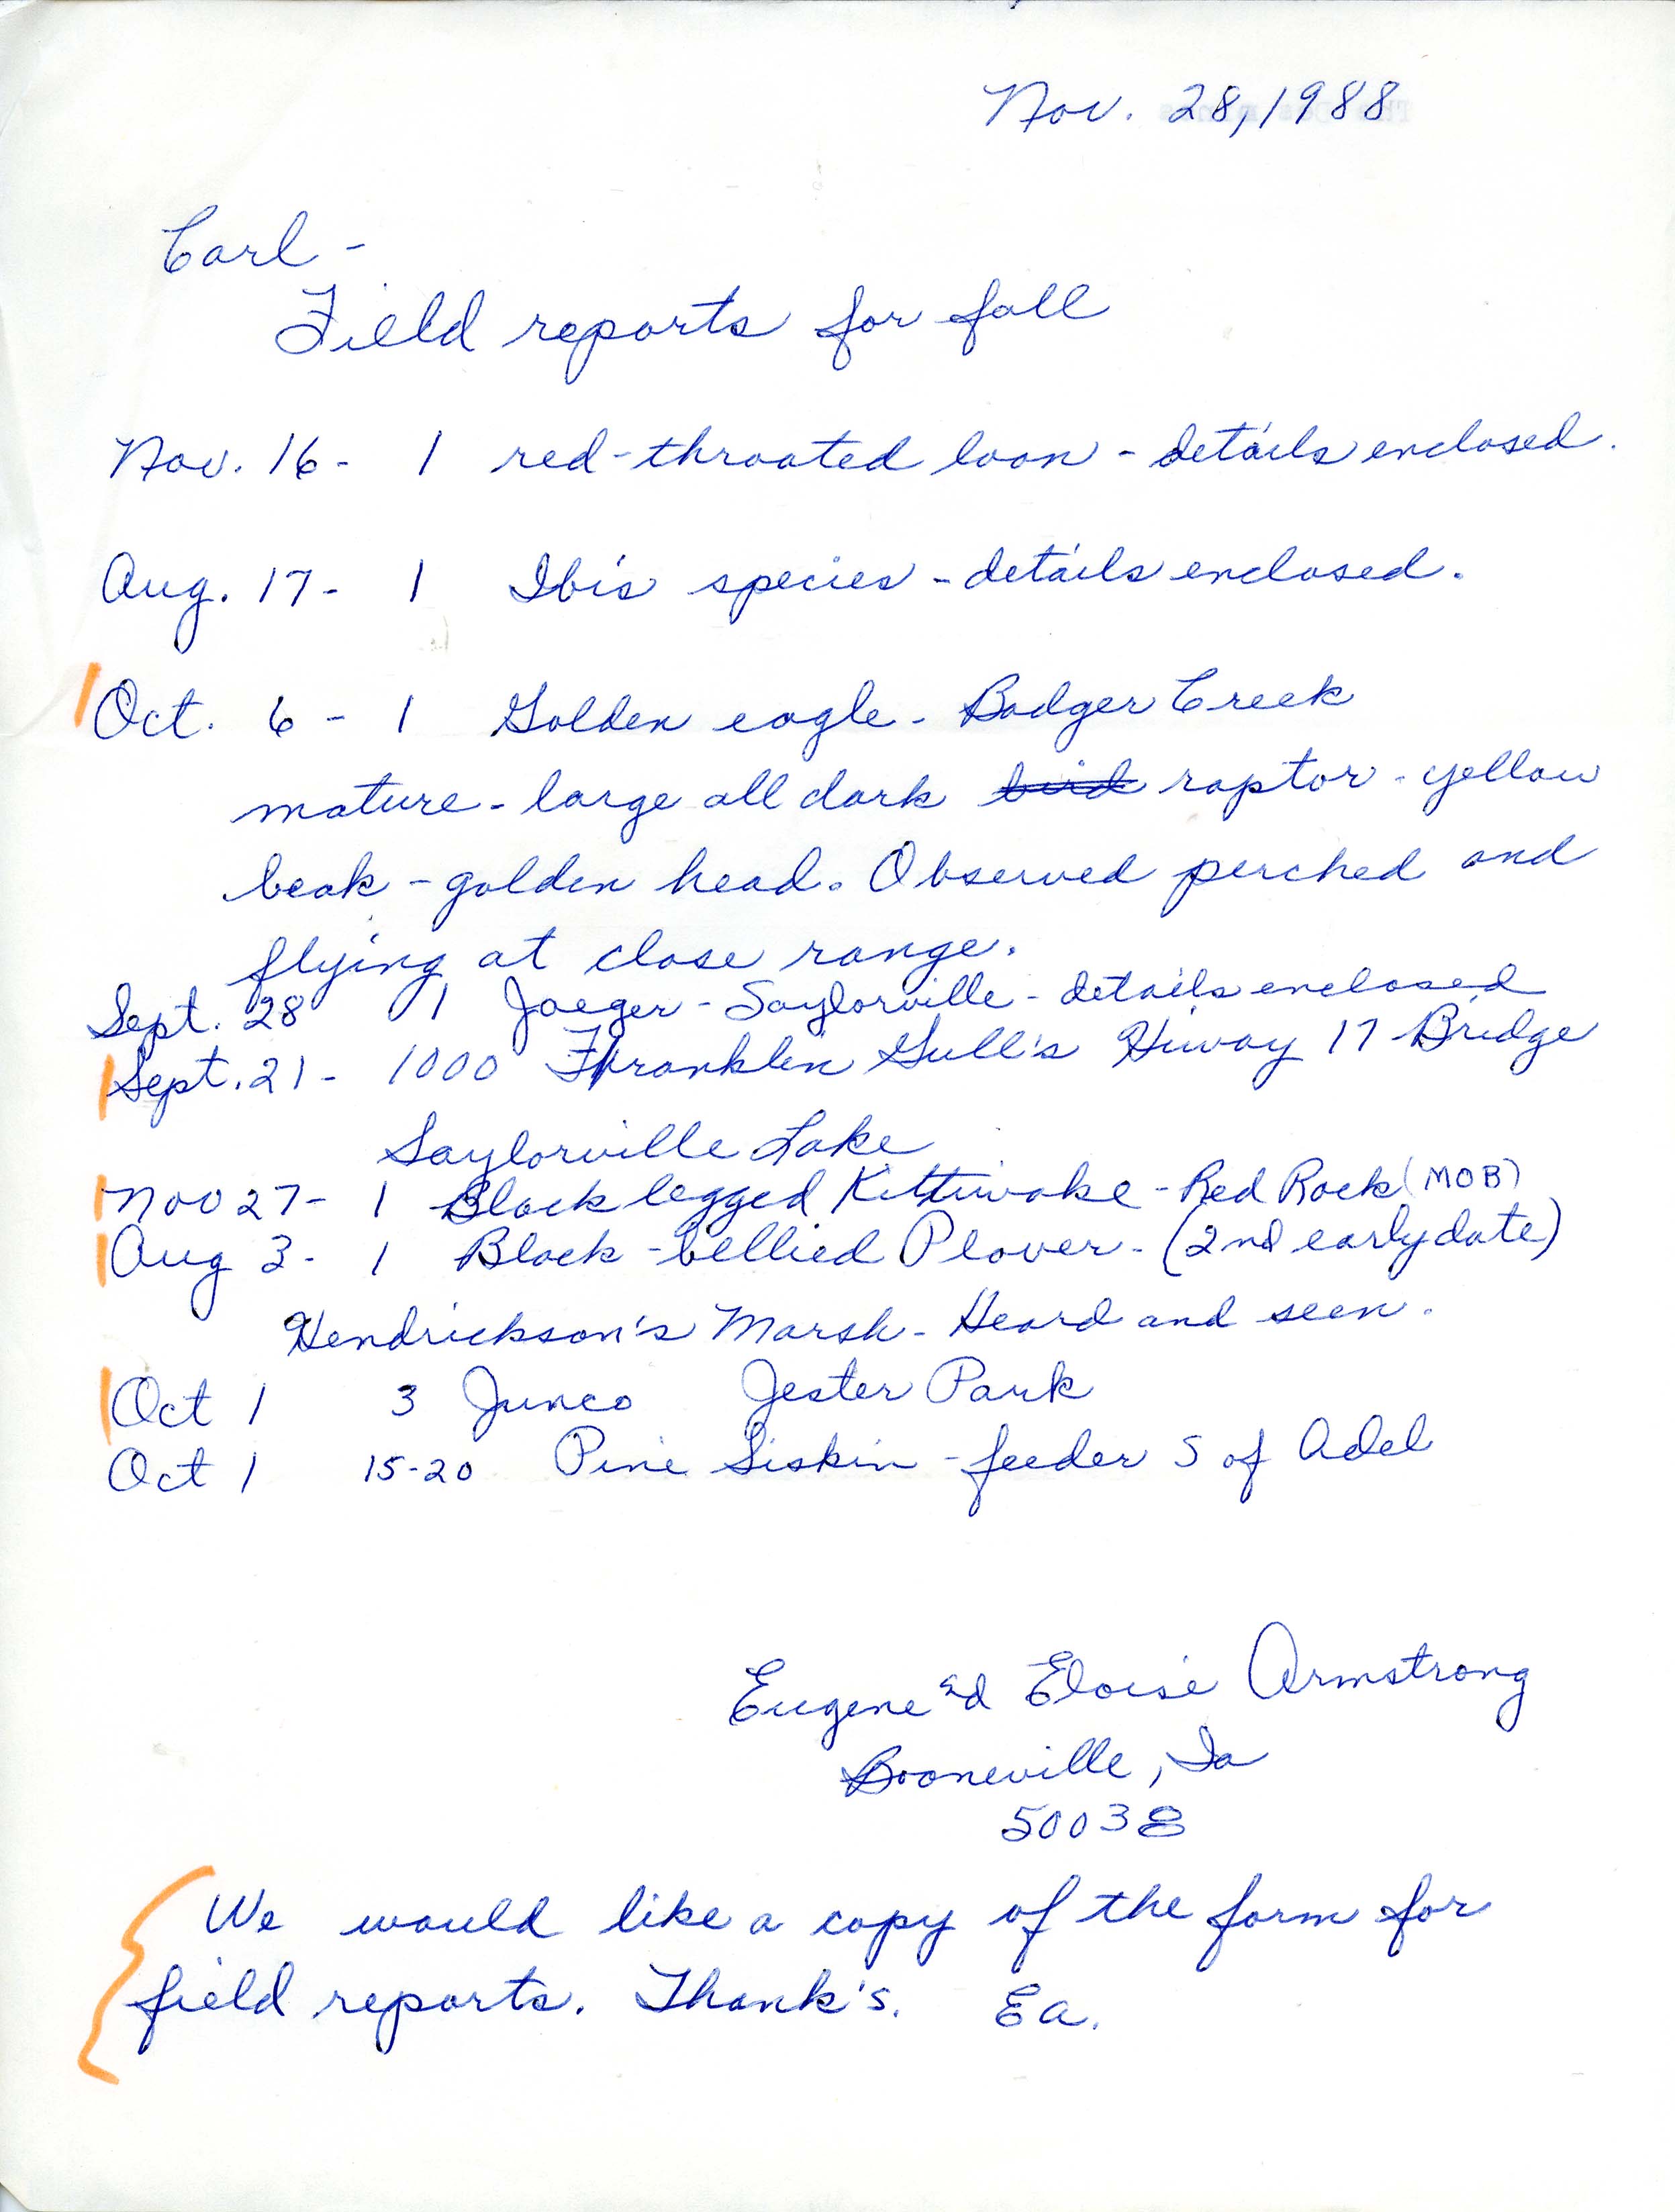 Eloise Armstrong and Eugene Armstrong letter to Carl J. Bendorf regarding bird sightings, November 28, 1988